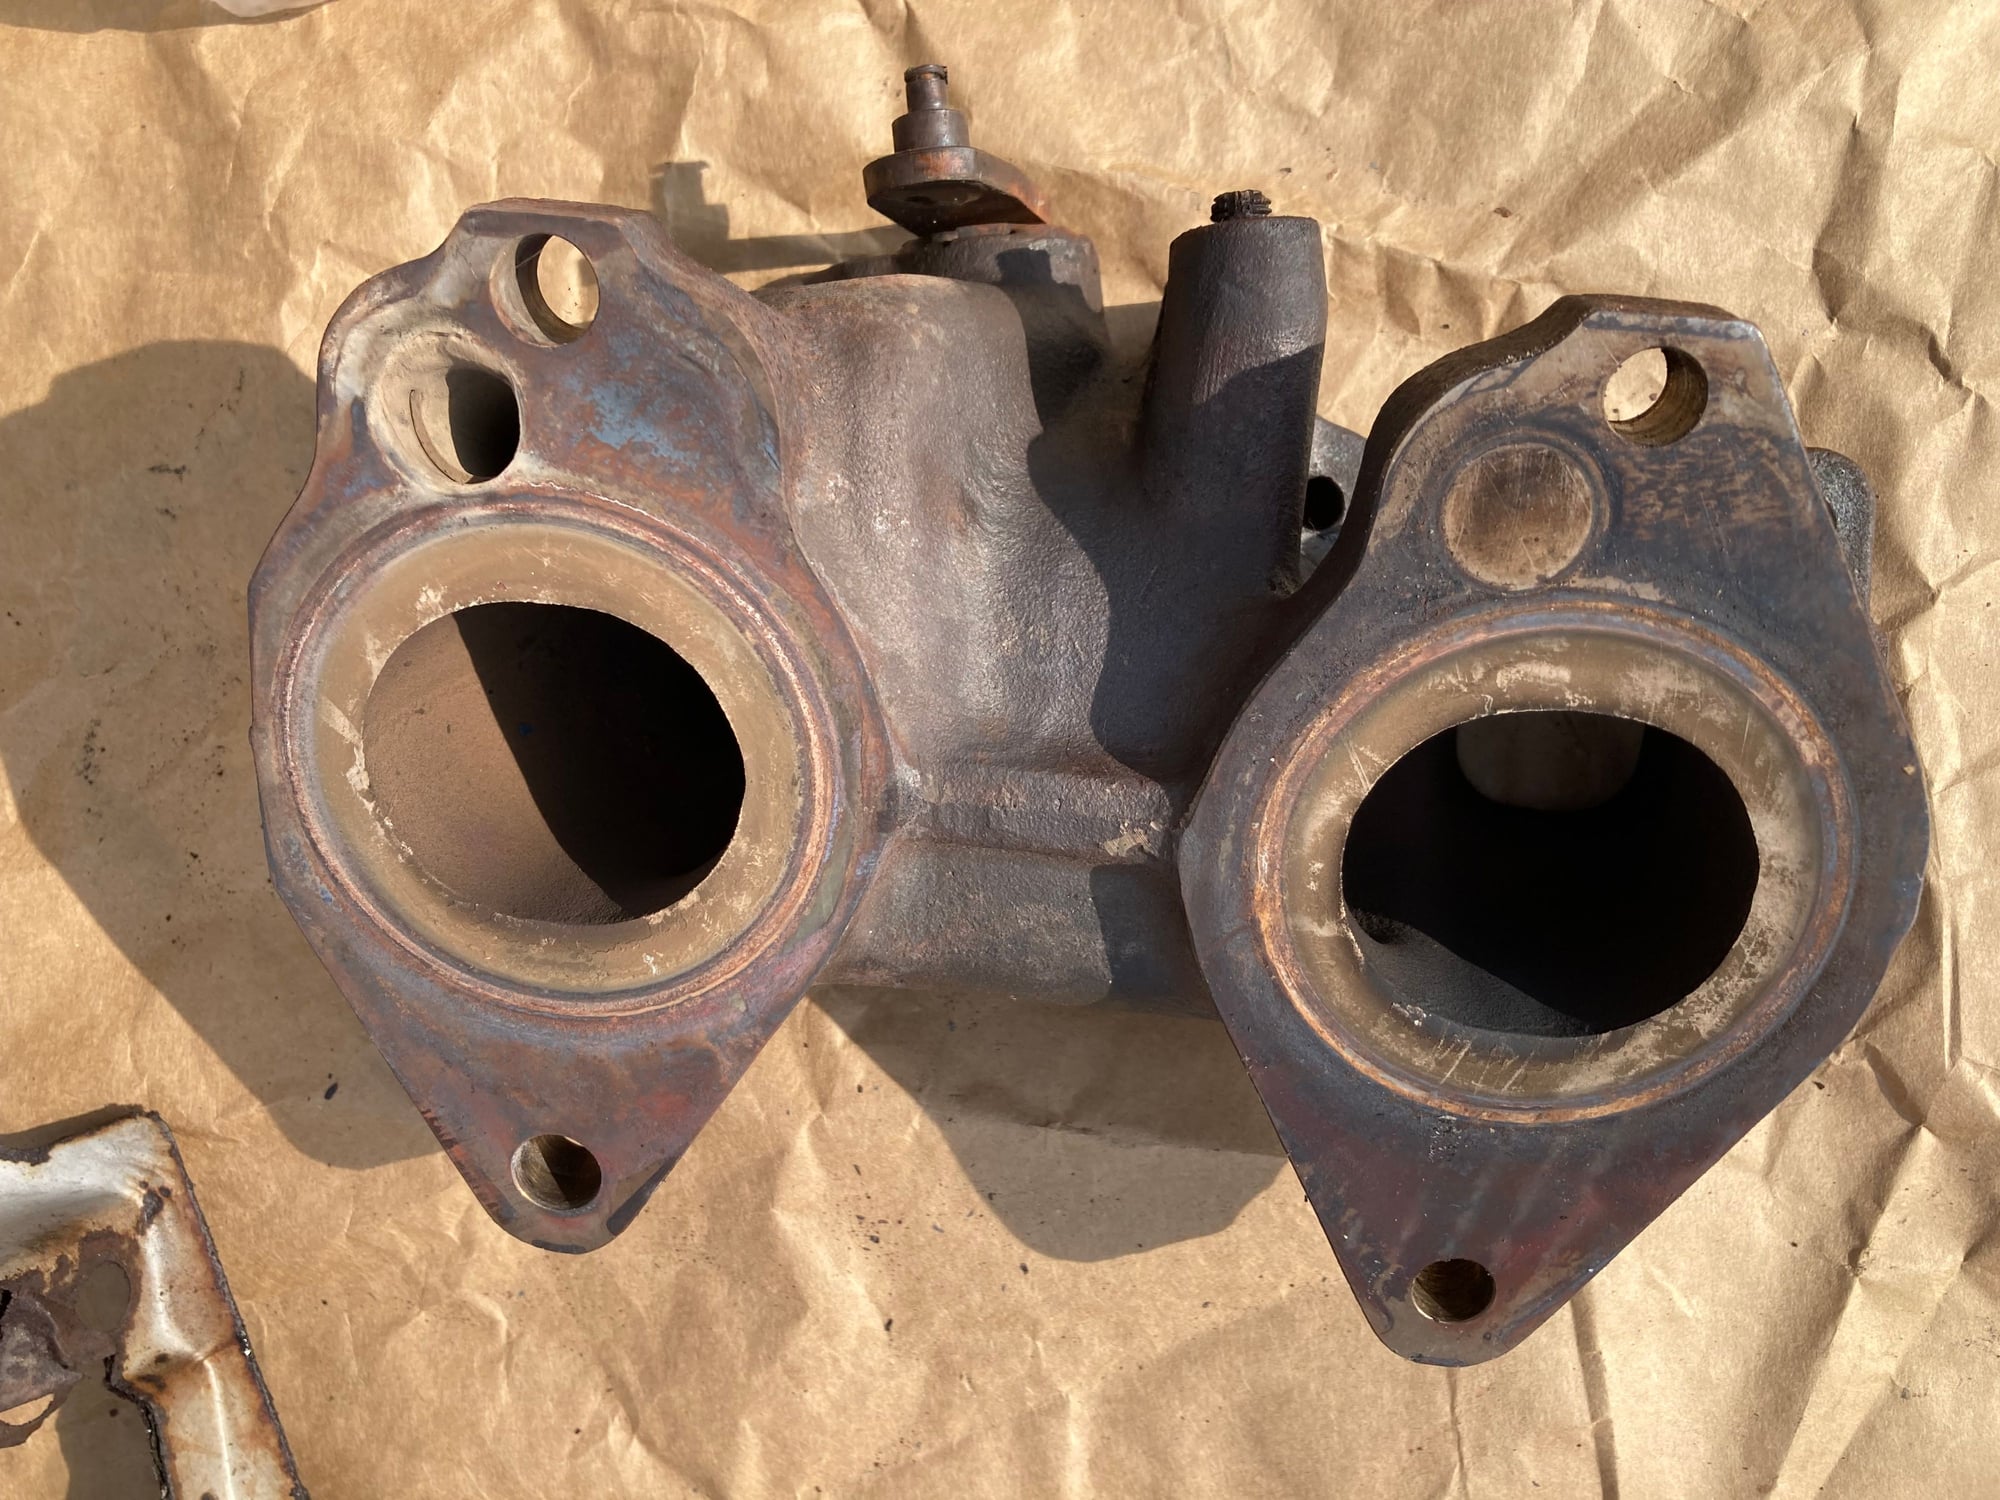 Engine - Power Adders - HT-12 Twin Turbos and Manifold (FD3S) - Used - 1993 to 2002 Mazda RX-7 - Seekonk, MA 02771, United States